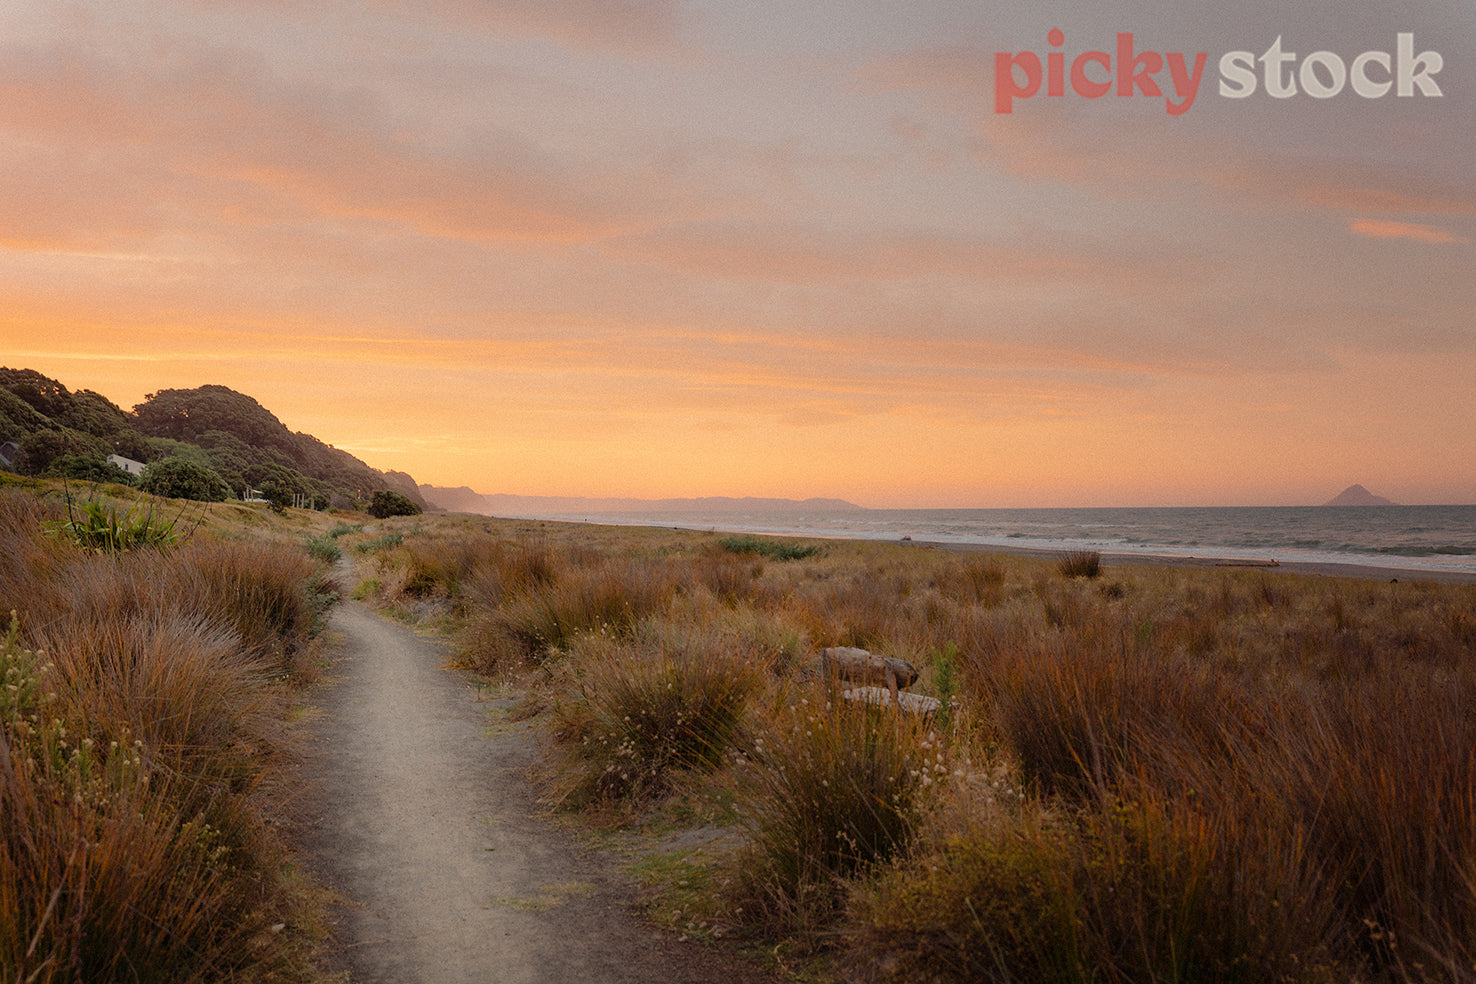 Sunset scene at Opotiki. Landscape shot of the path around the edge of the ocean. Ocean is right of frame, with small waves.Path is gravel, with dry plants around the edge. Sky is a beautiful orange with different tones of yellow. 